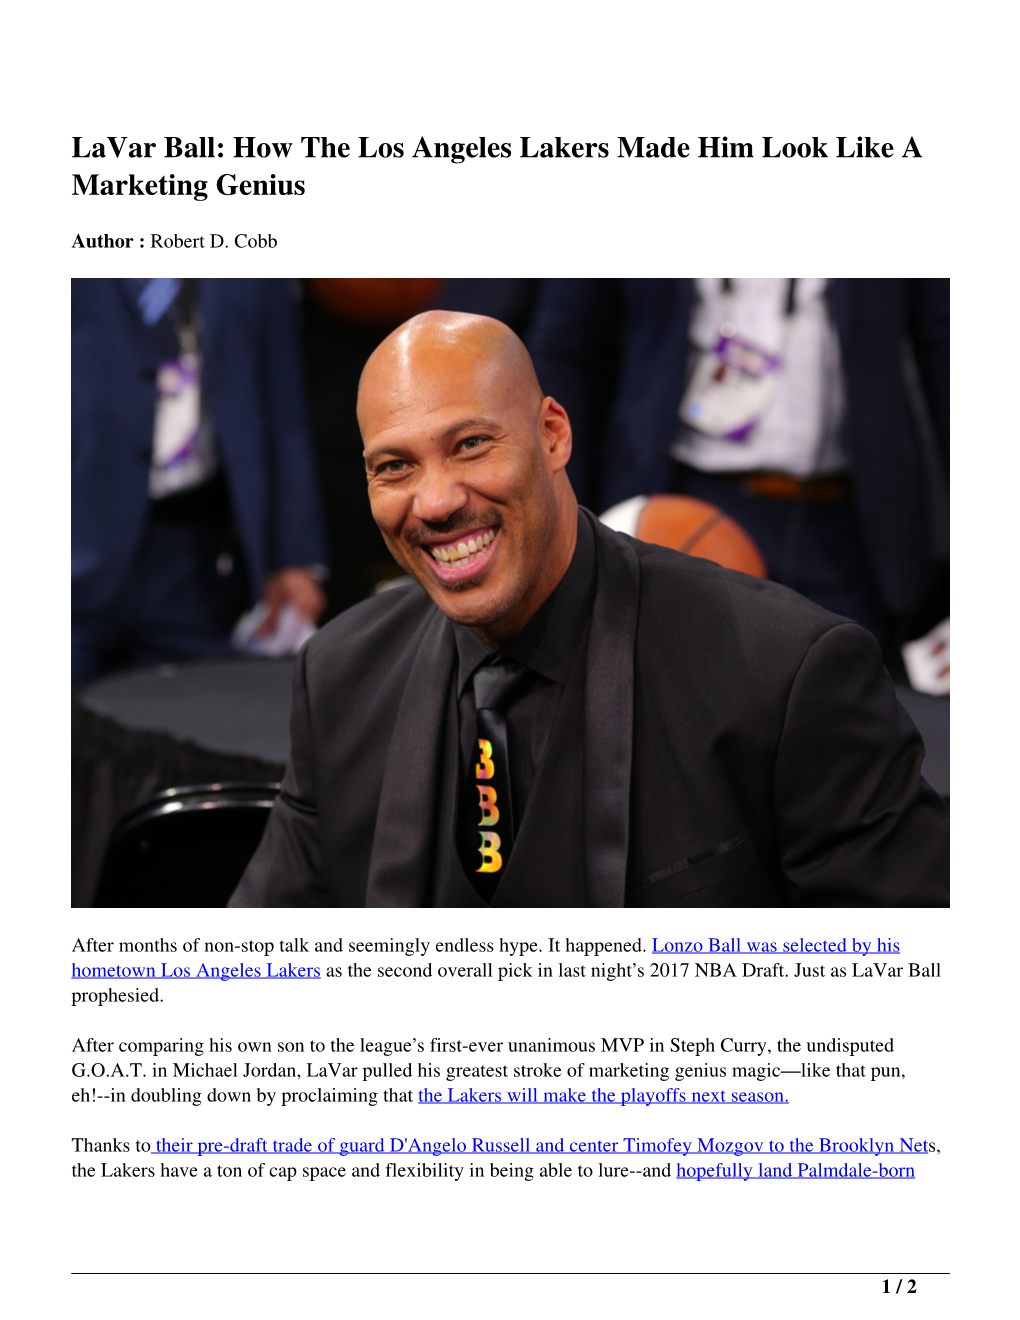 Lavar Ball: How the Los Angeles Lakers Made Him Look Like a Marketing Genius